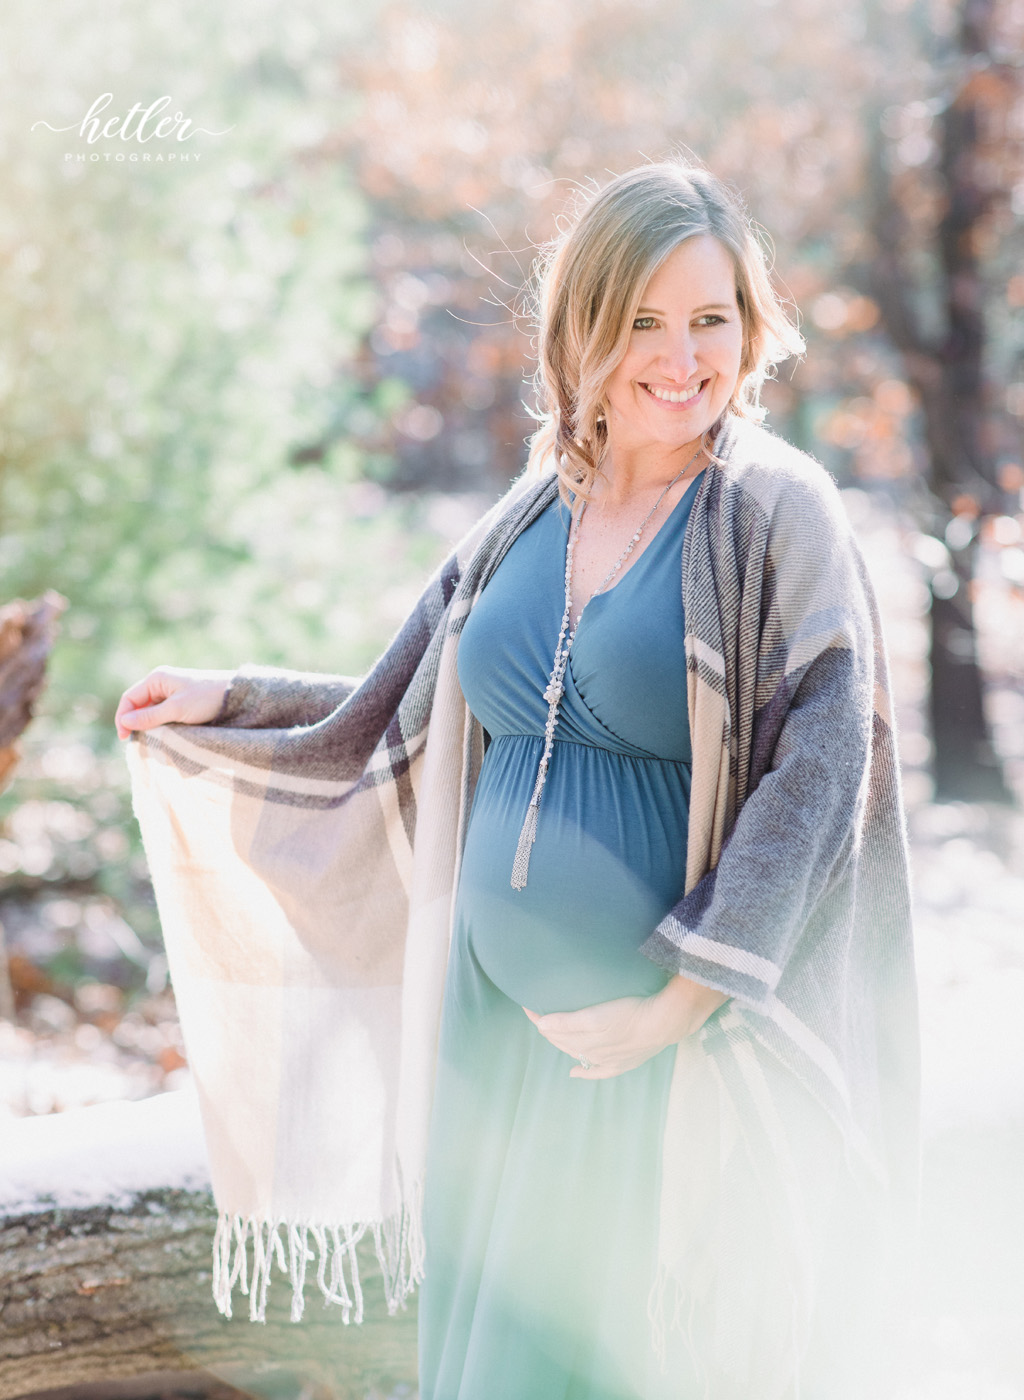 Grand Rapids light and airy maternity photography at Provin Trails